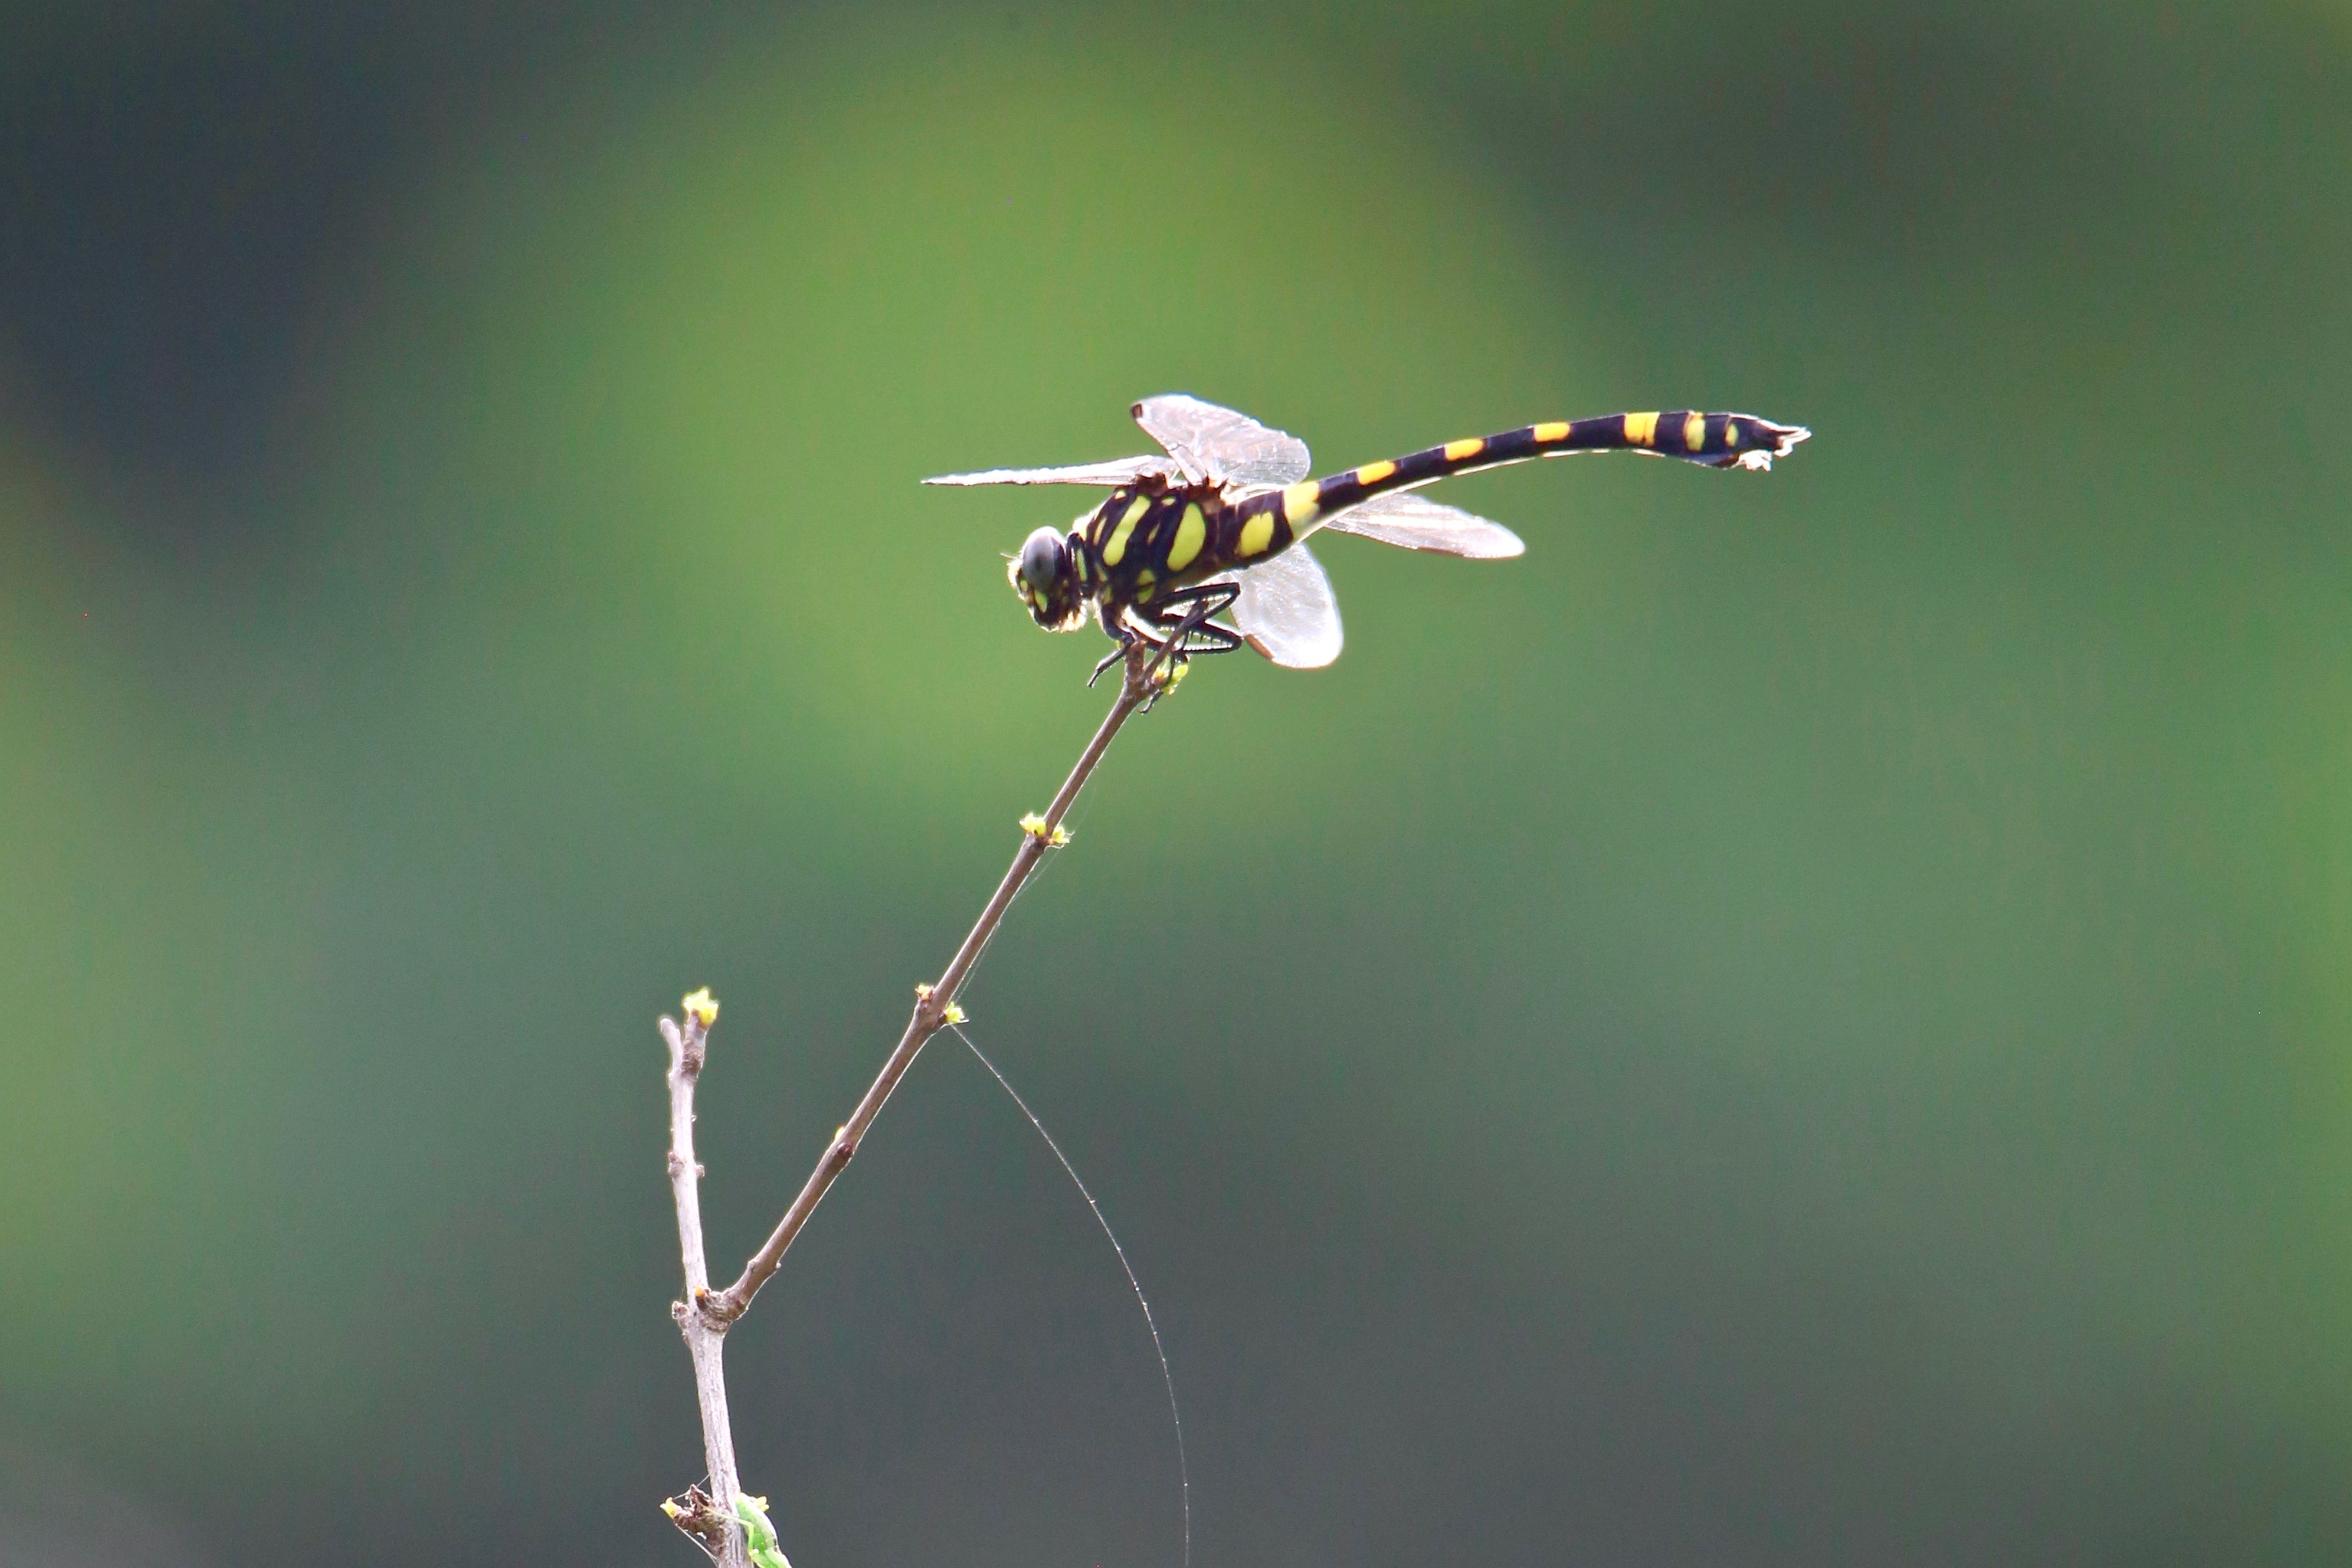 Indian Common Clubtail dragonfly, dragonflies of India high resolution images free